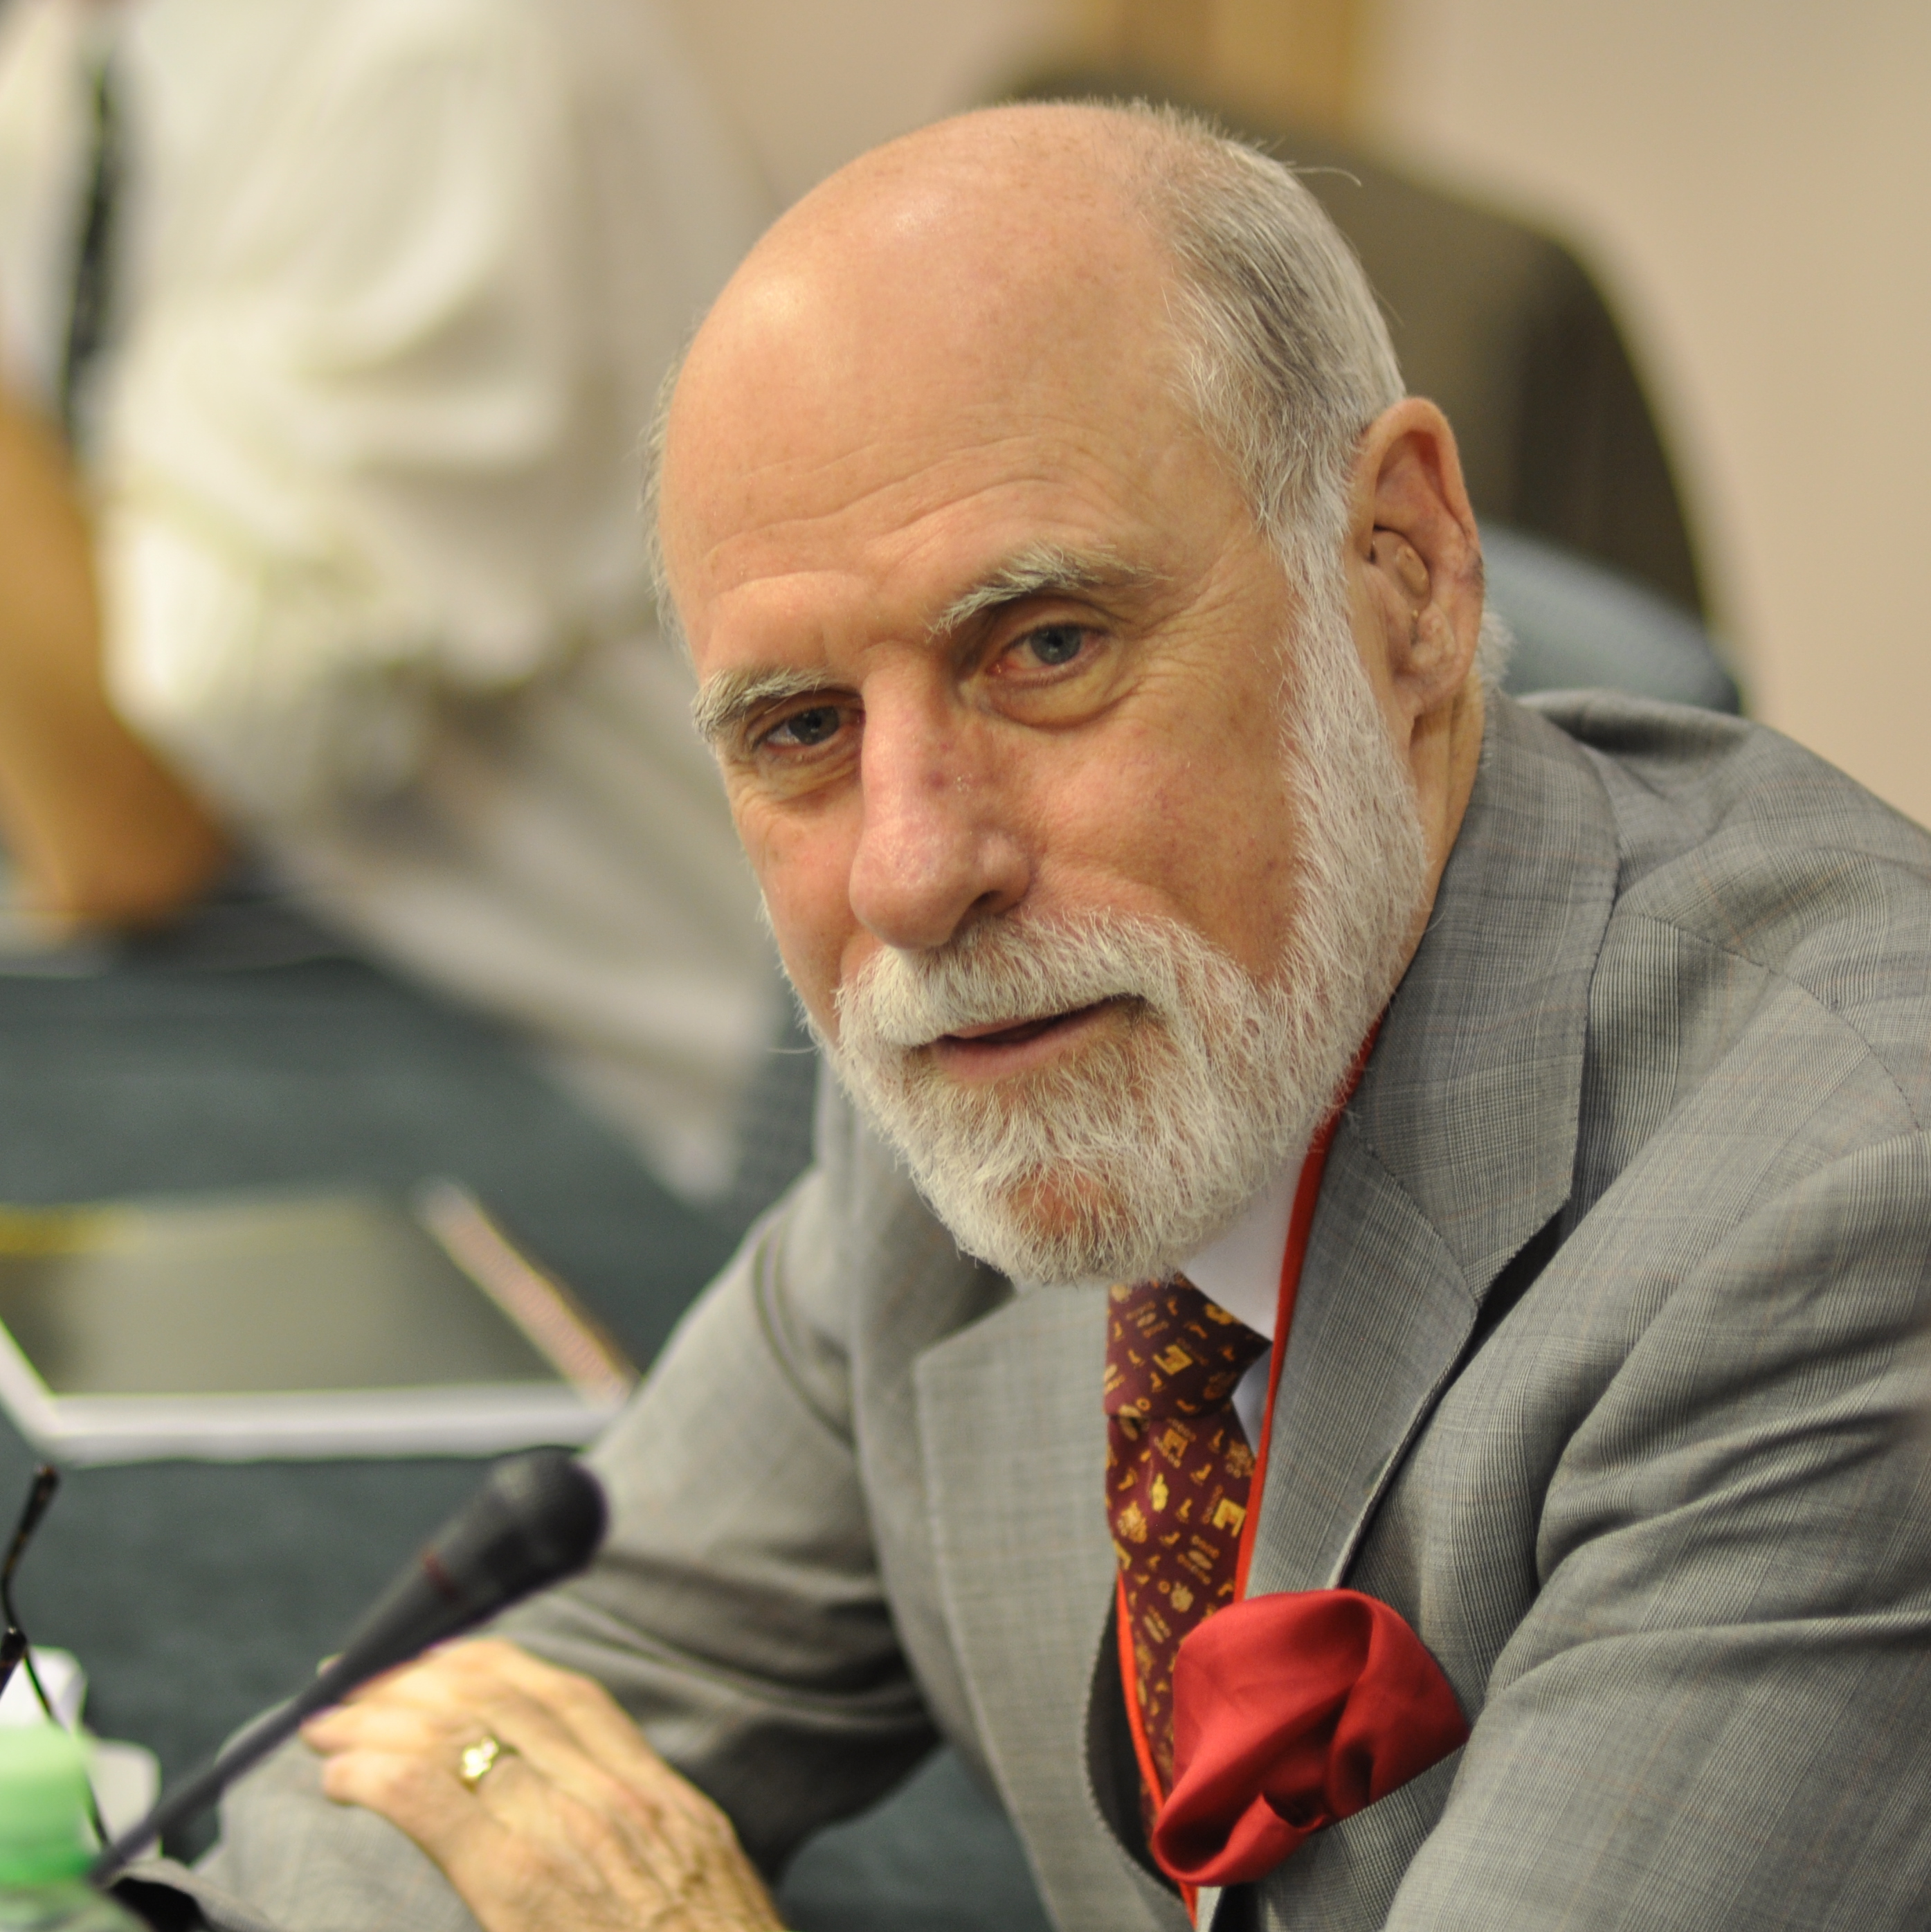 The engineer Vinton Cerf in an event in 2010 (by Veni Markovski/Wikipedia)